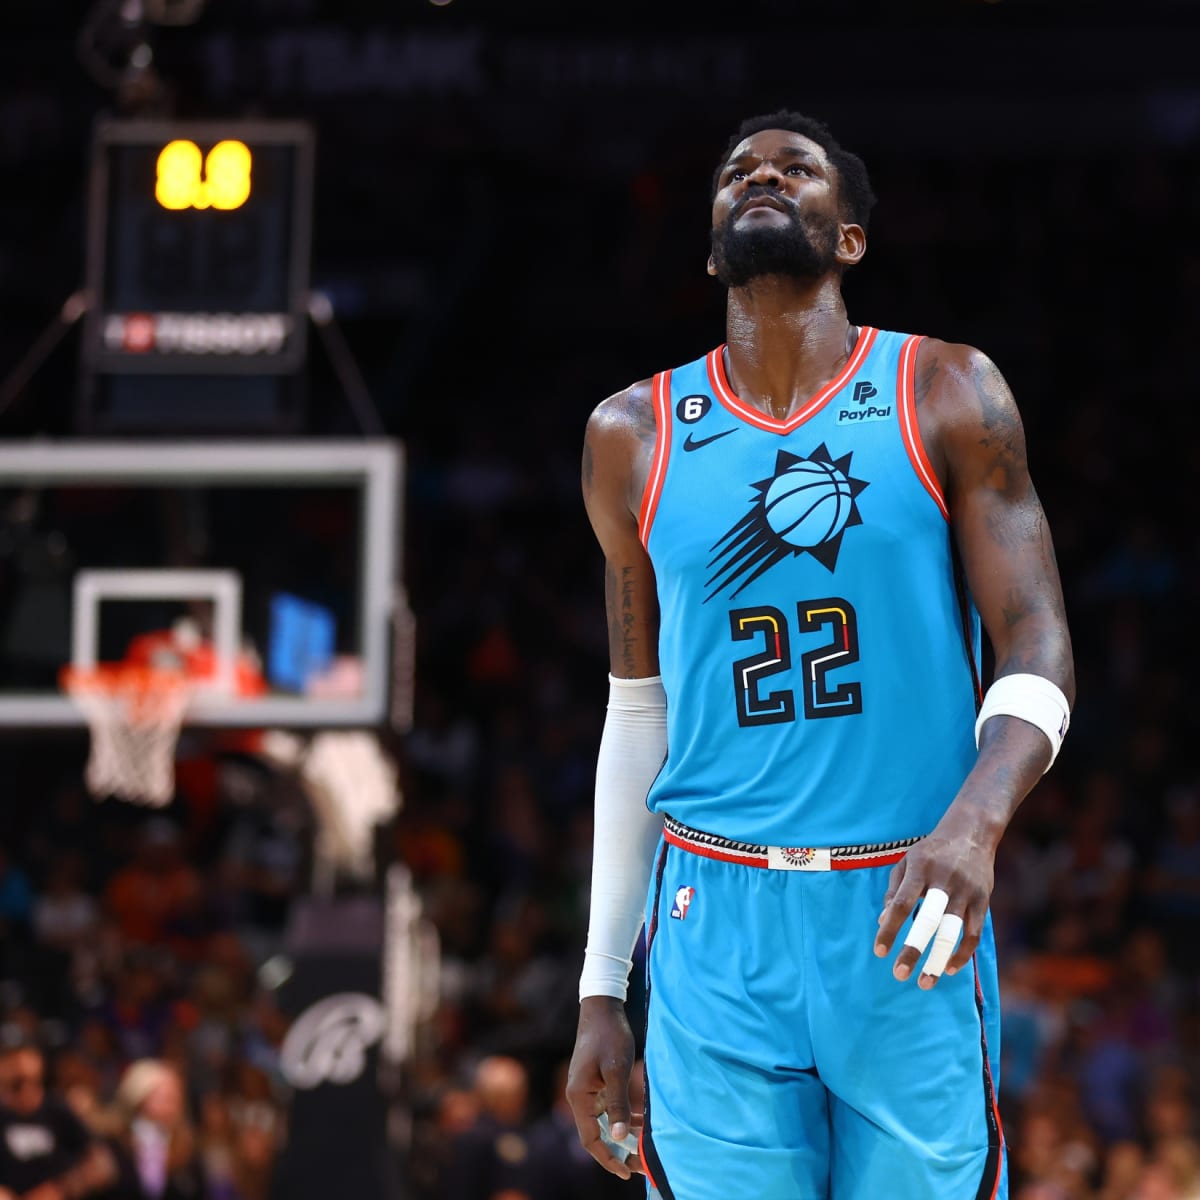 Deandre Ayton is available but the Thunder should stay patient